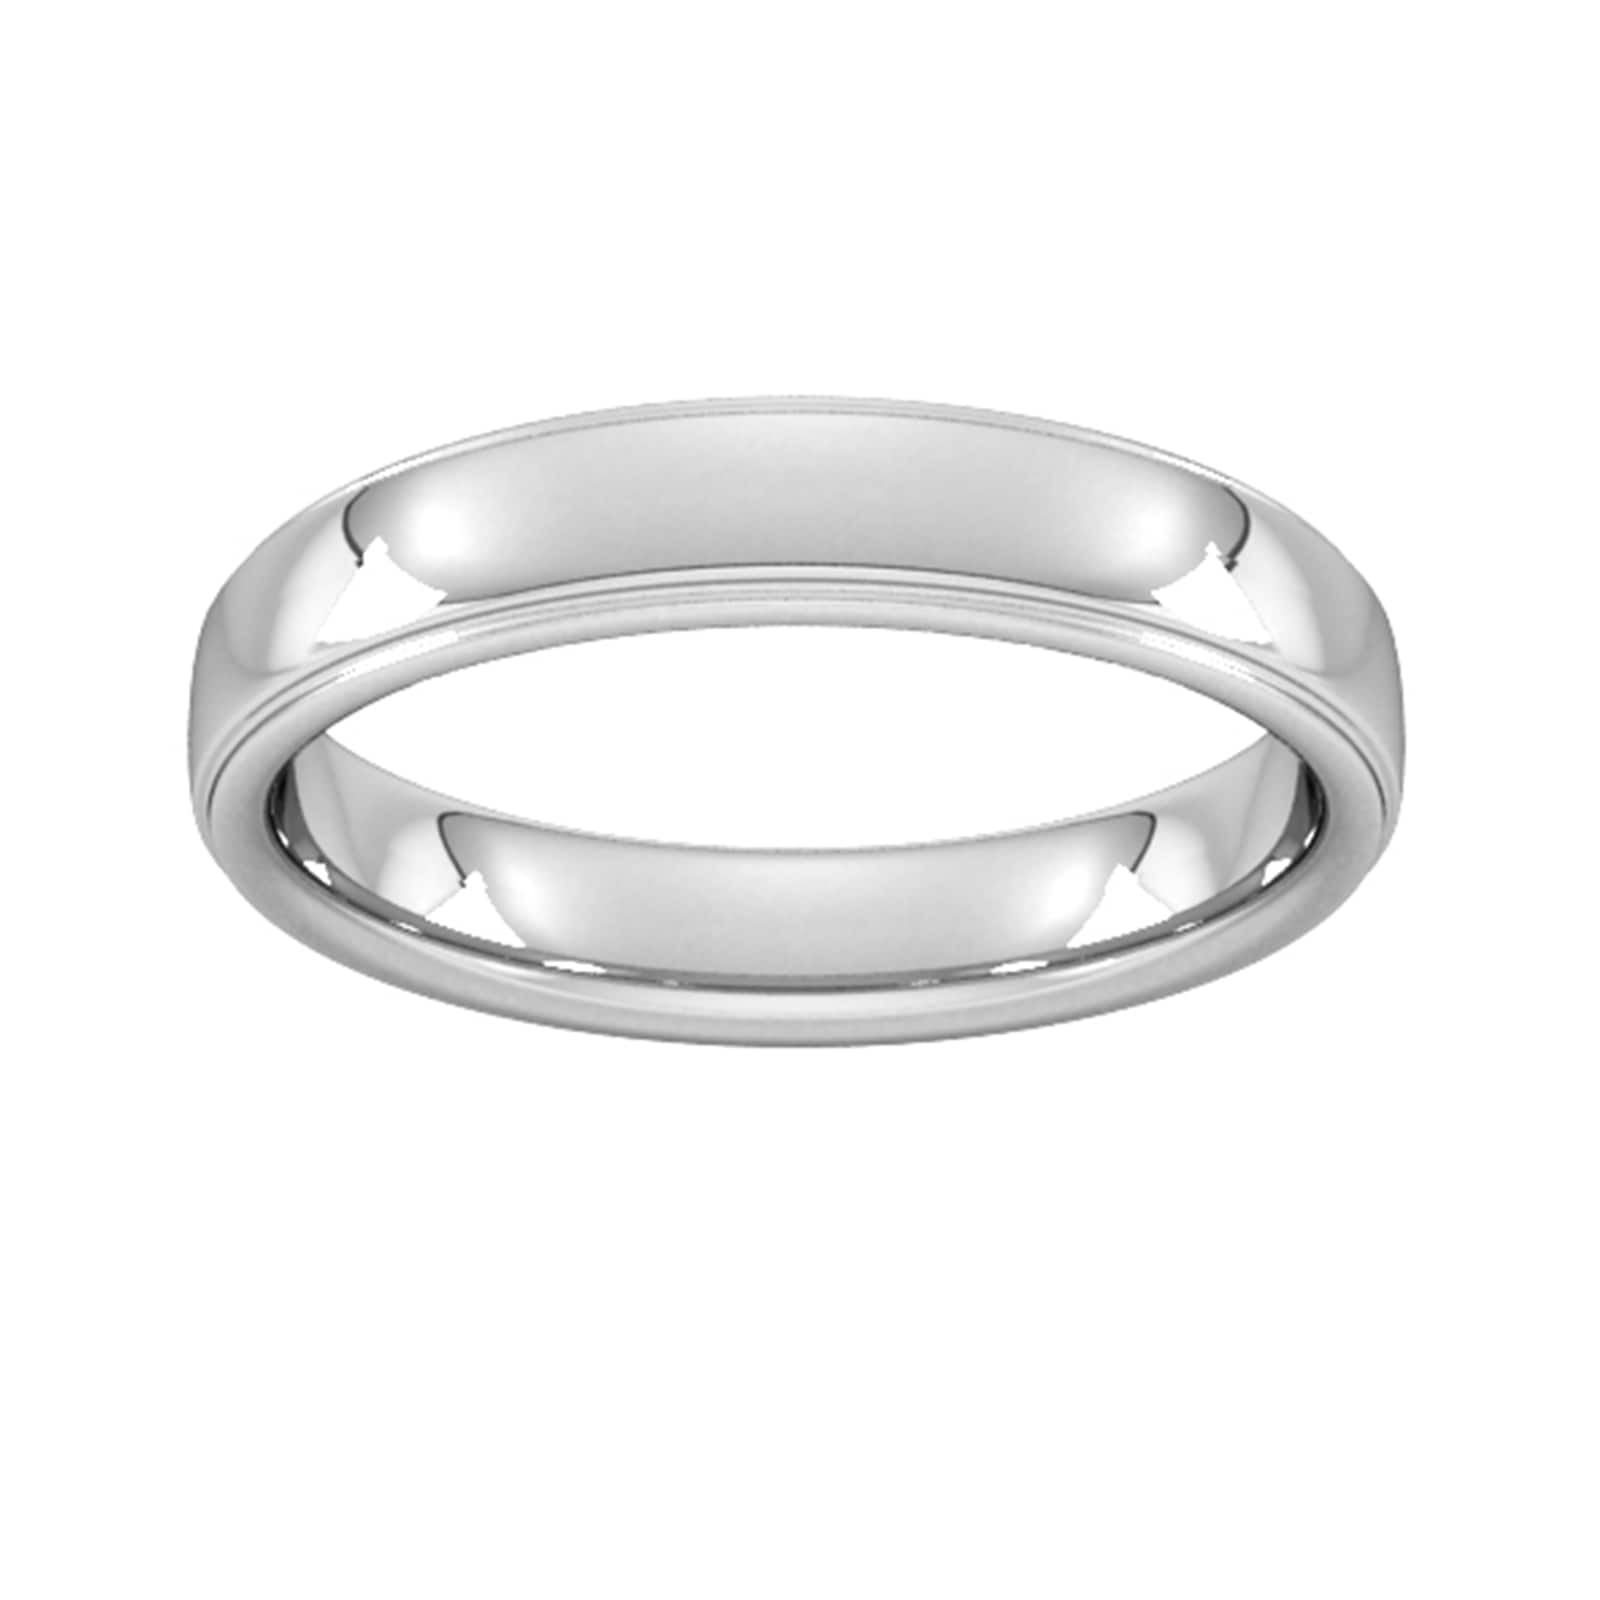 4mm Flat Court Heavy Polished Finish With Grooves Wedding Ring In 9 Carat White Gold - Ring Size G